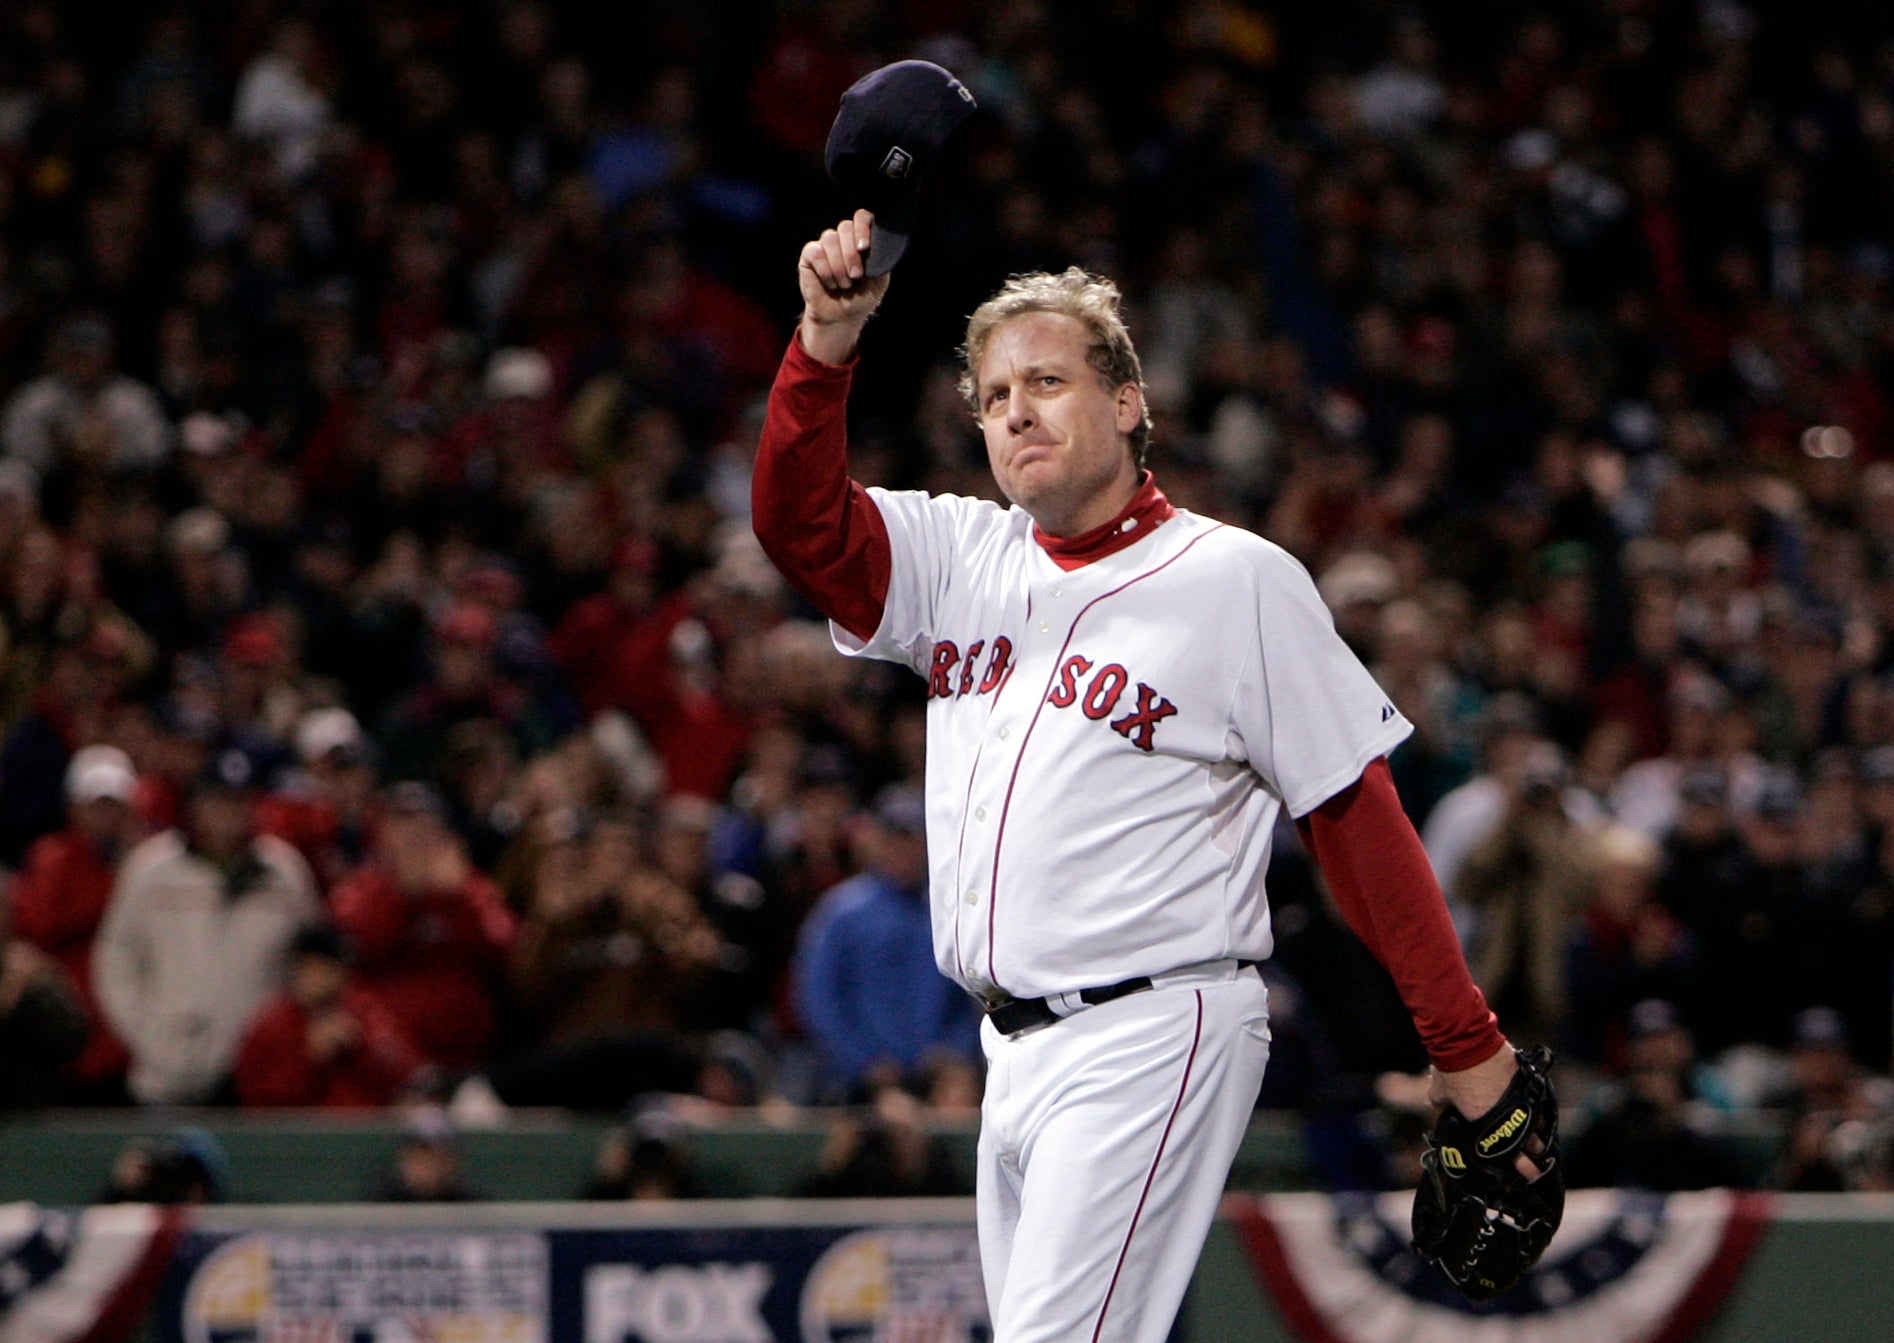 Curt Schilling addresses just missing out on Hall of Fame, asks to be taken  off ballot - The Boston Globe